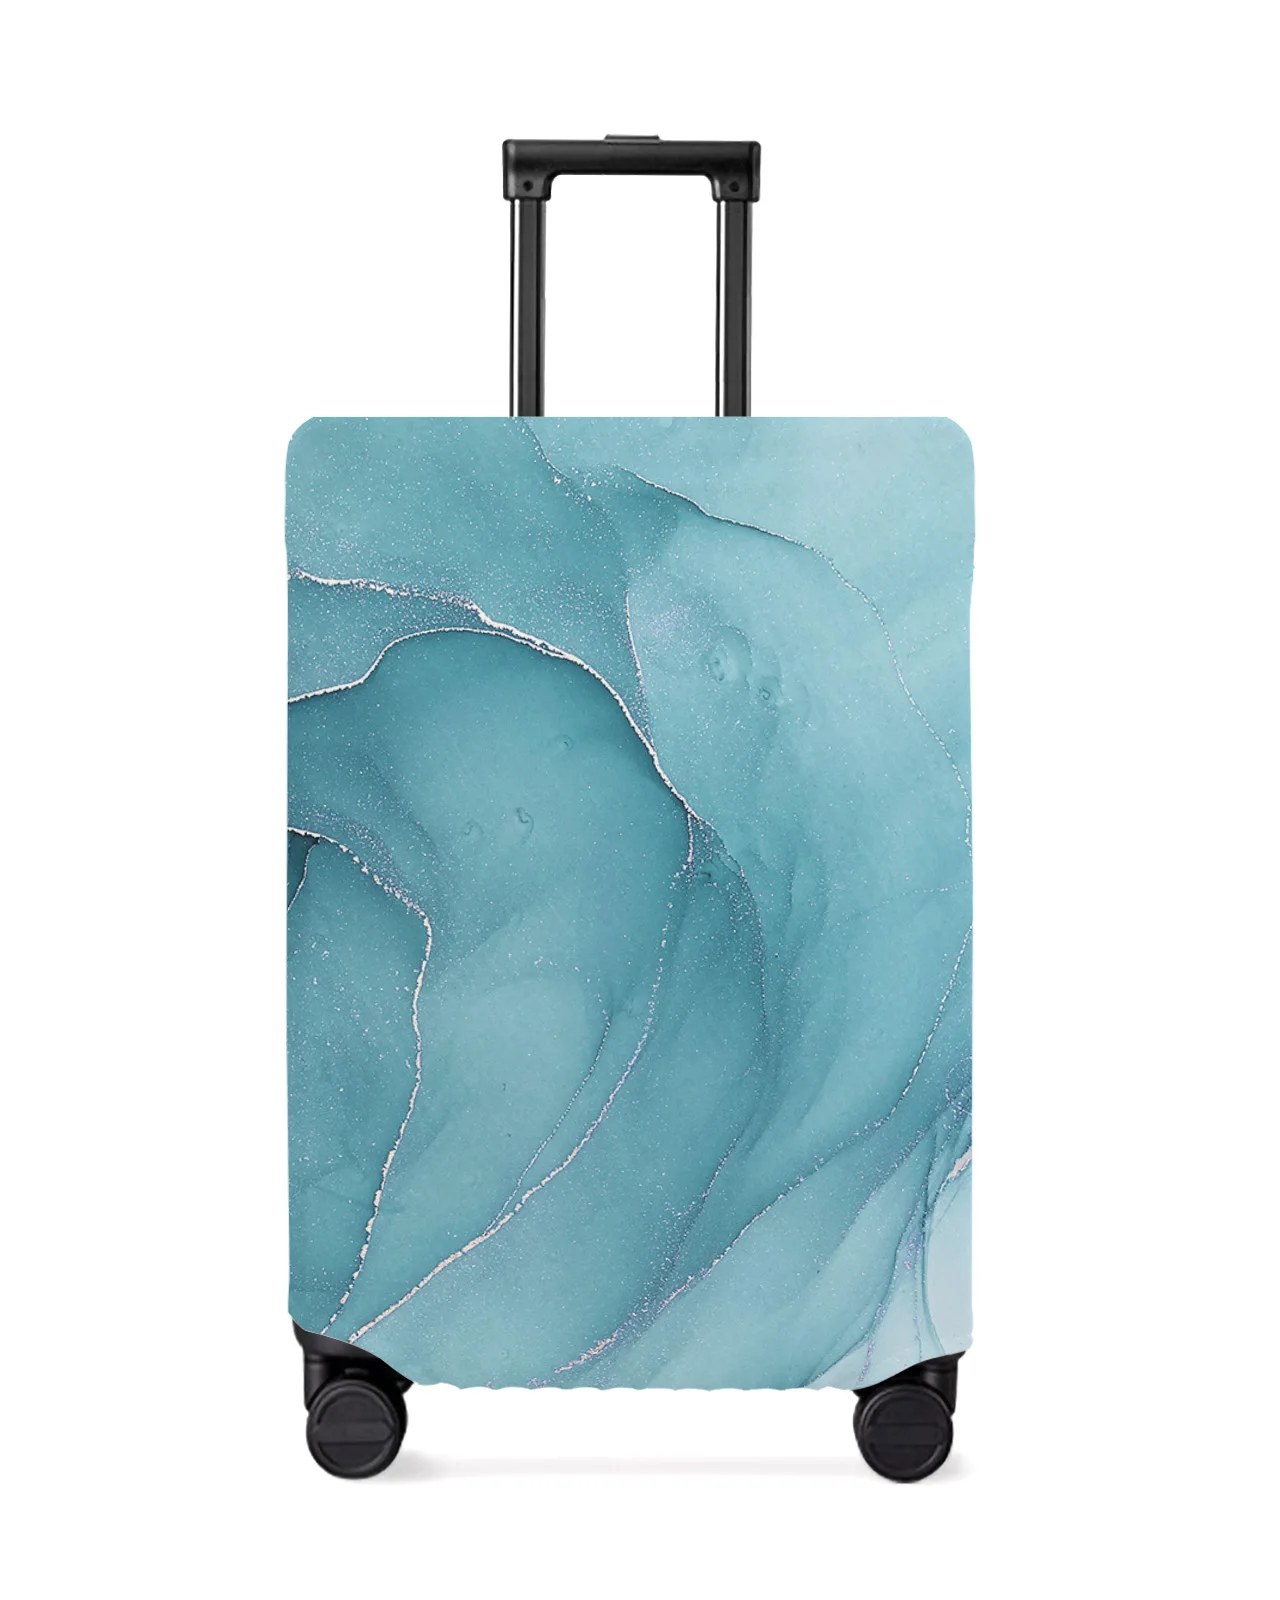 marble-agate-travel-luggage-protective-cover-for-18-32-inch-travel-accessories-suitcase-elastic-dust-duffle-case-protect-sleeve